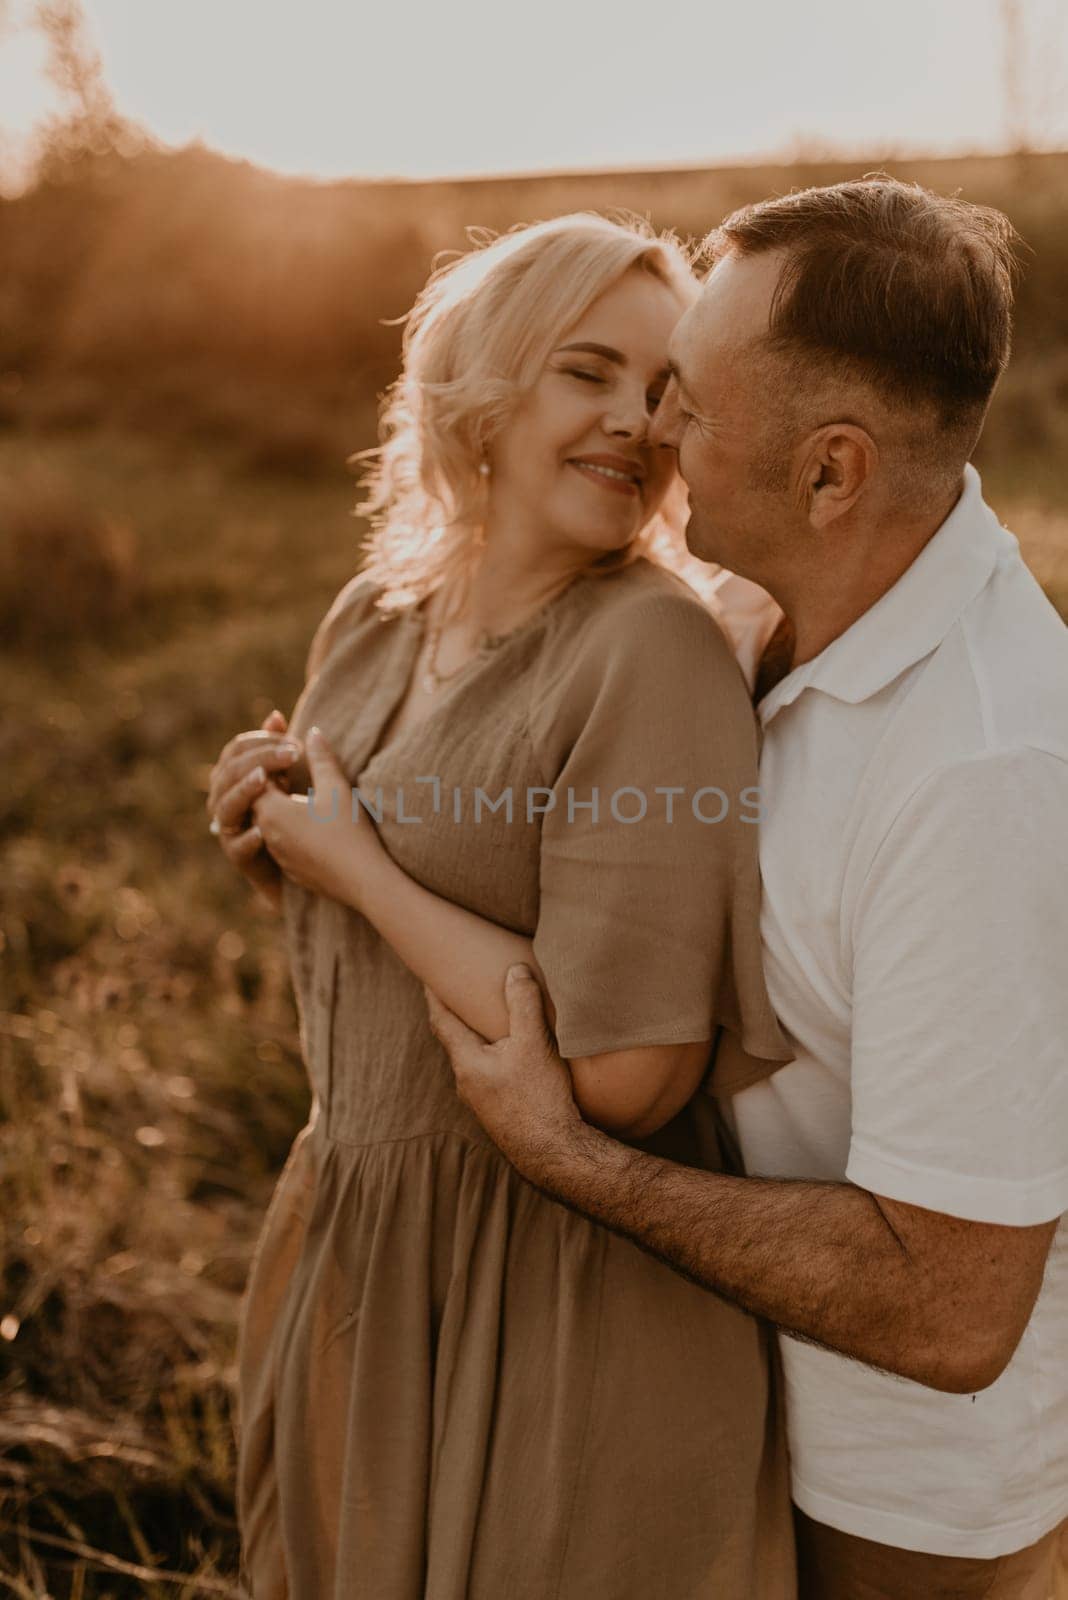 happy married couple mature people together for long time, secret of strong family relationships, cheerful joyful husband and wife together in harmony. middle-aged couple walking in nature at summer